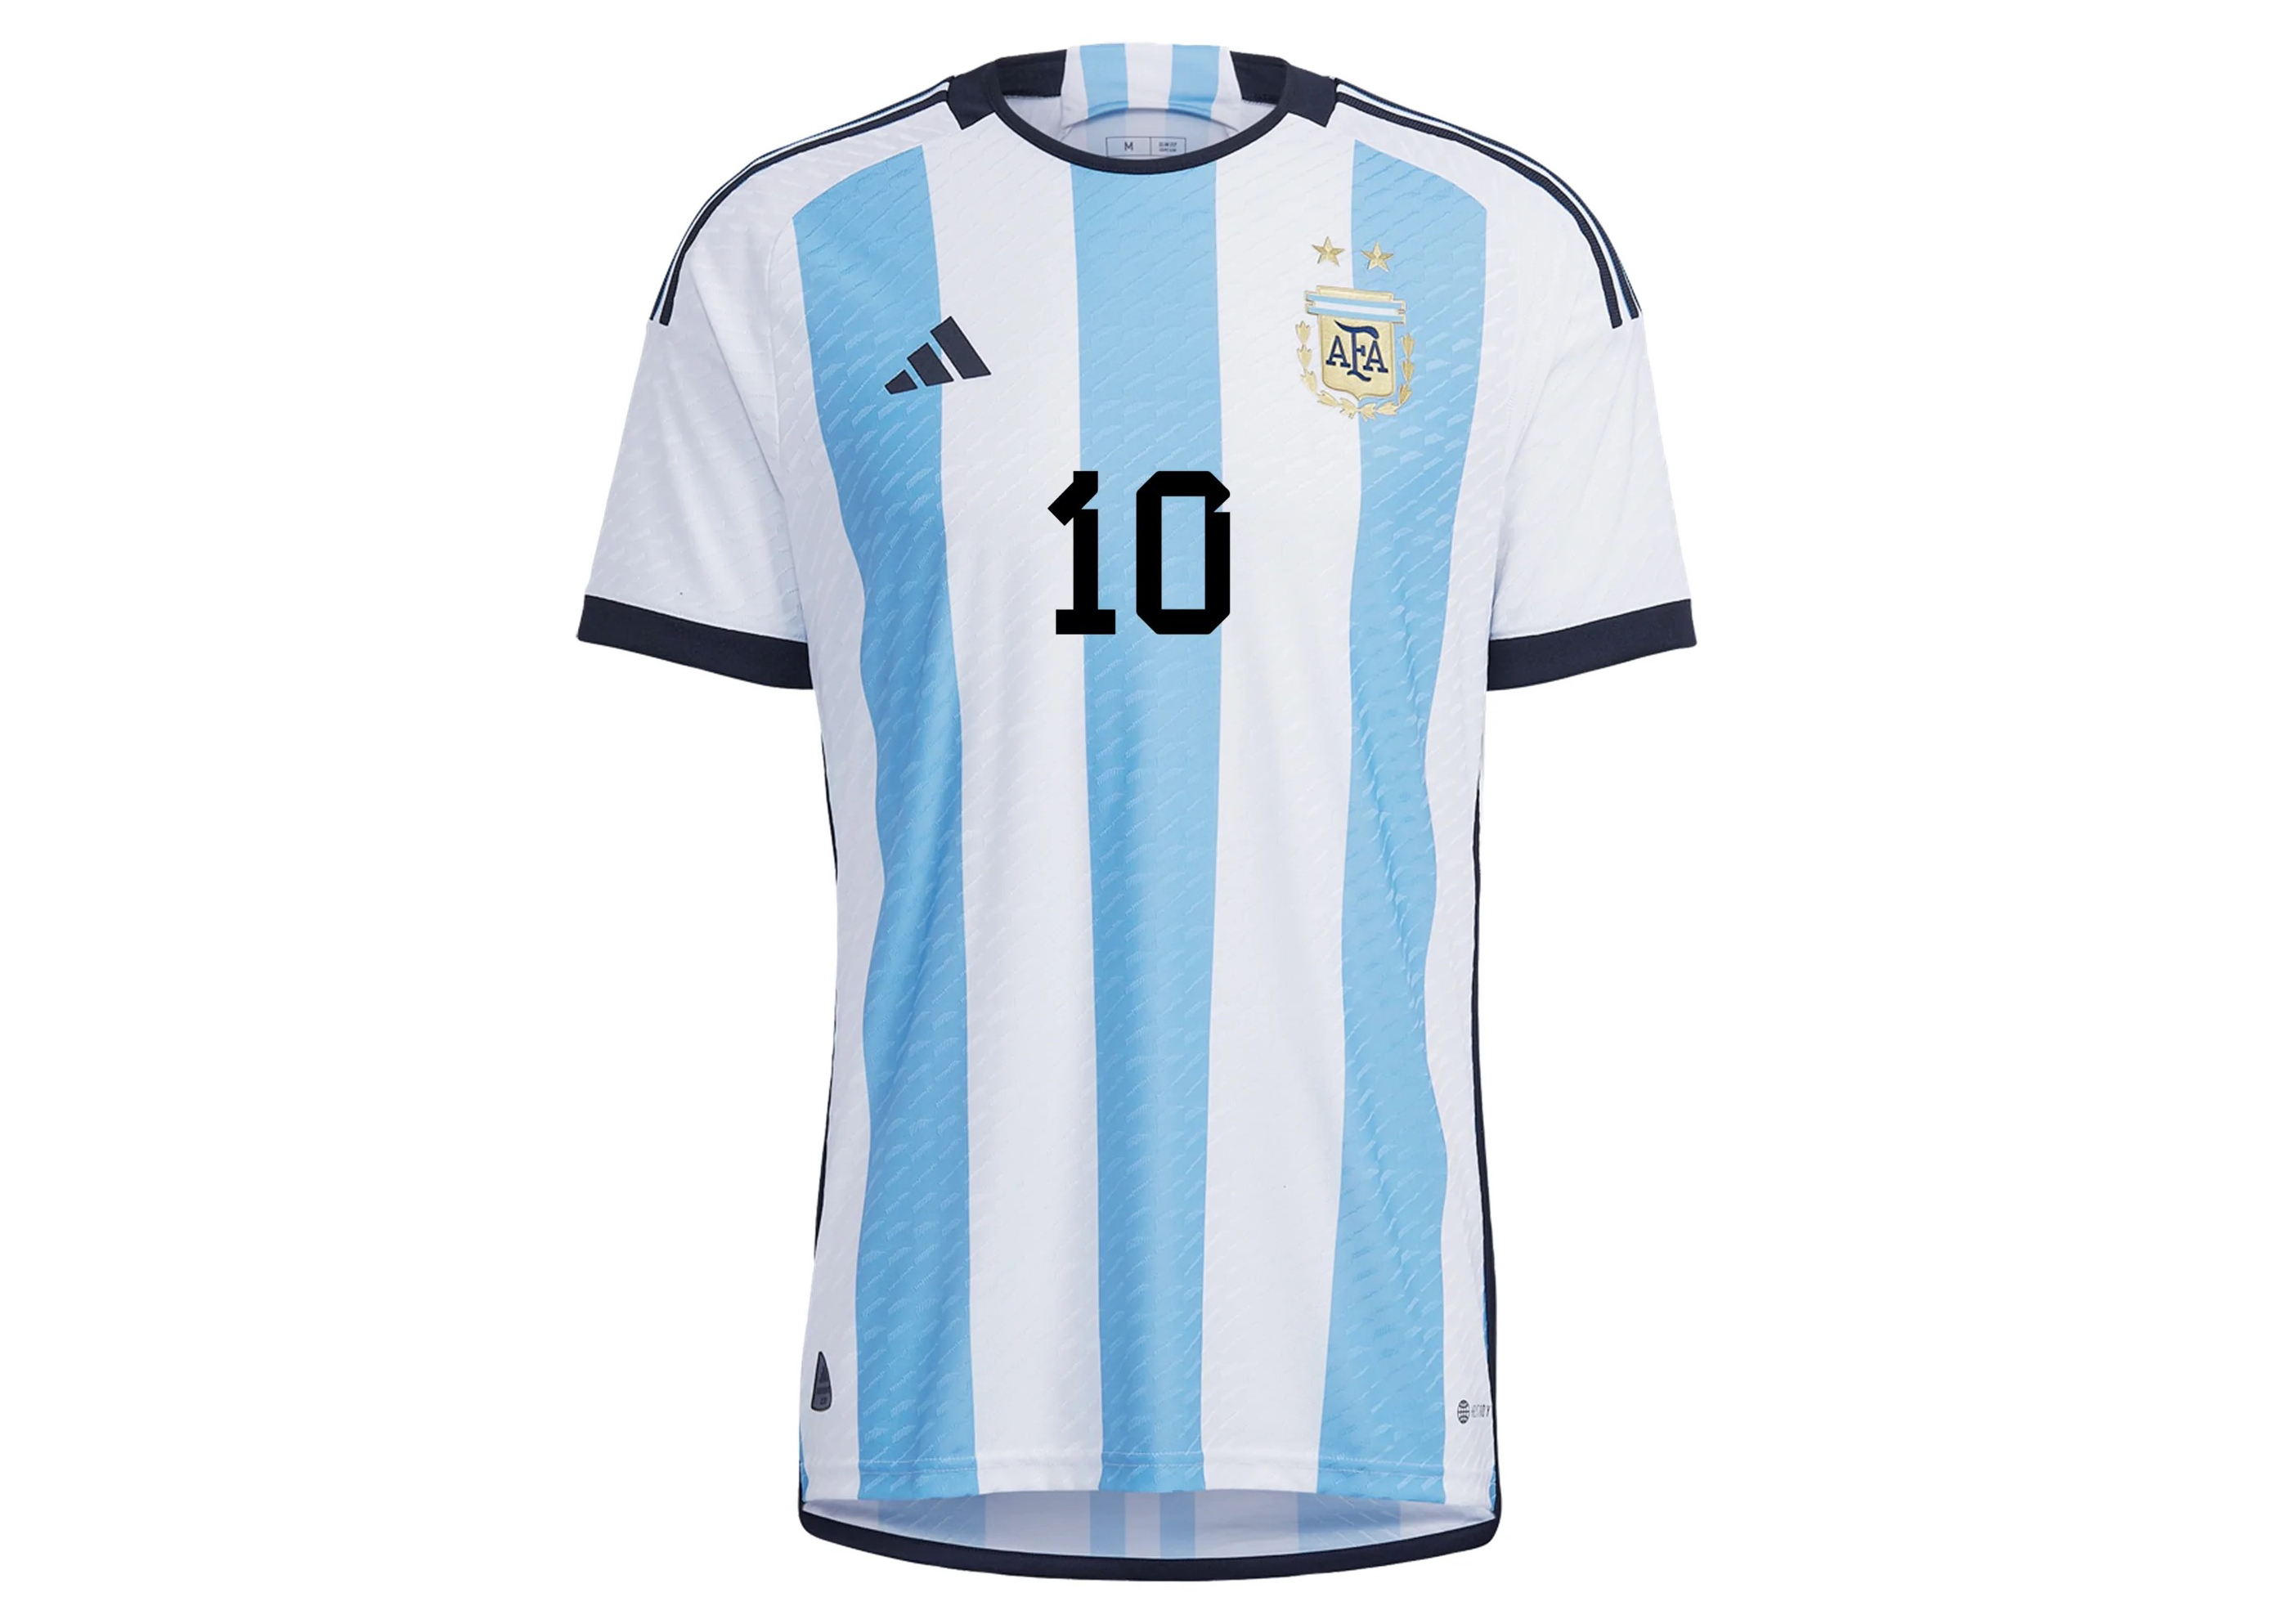 argentina soccer jersey youth size chart,